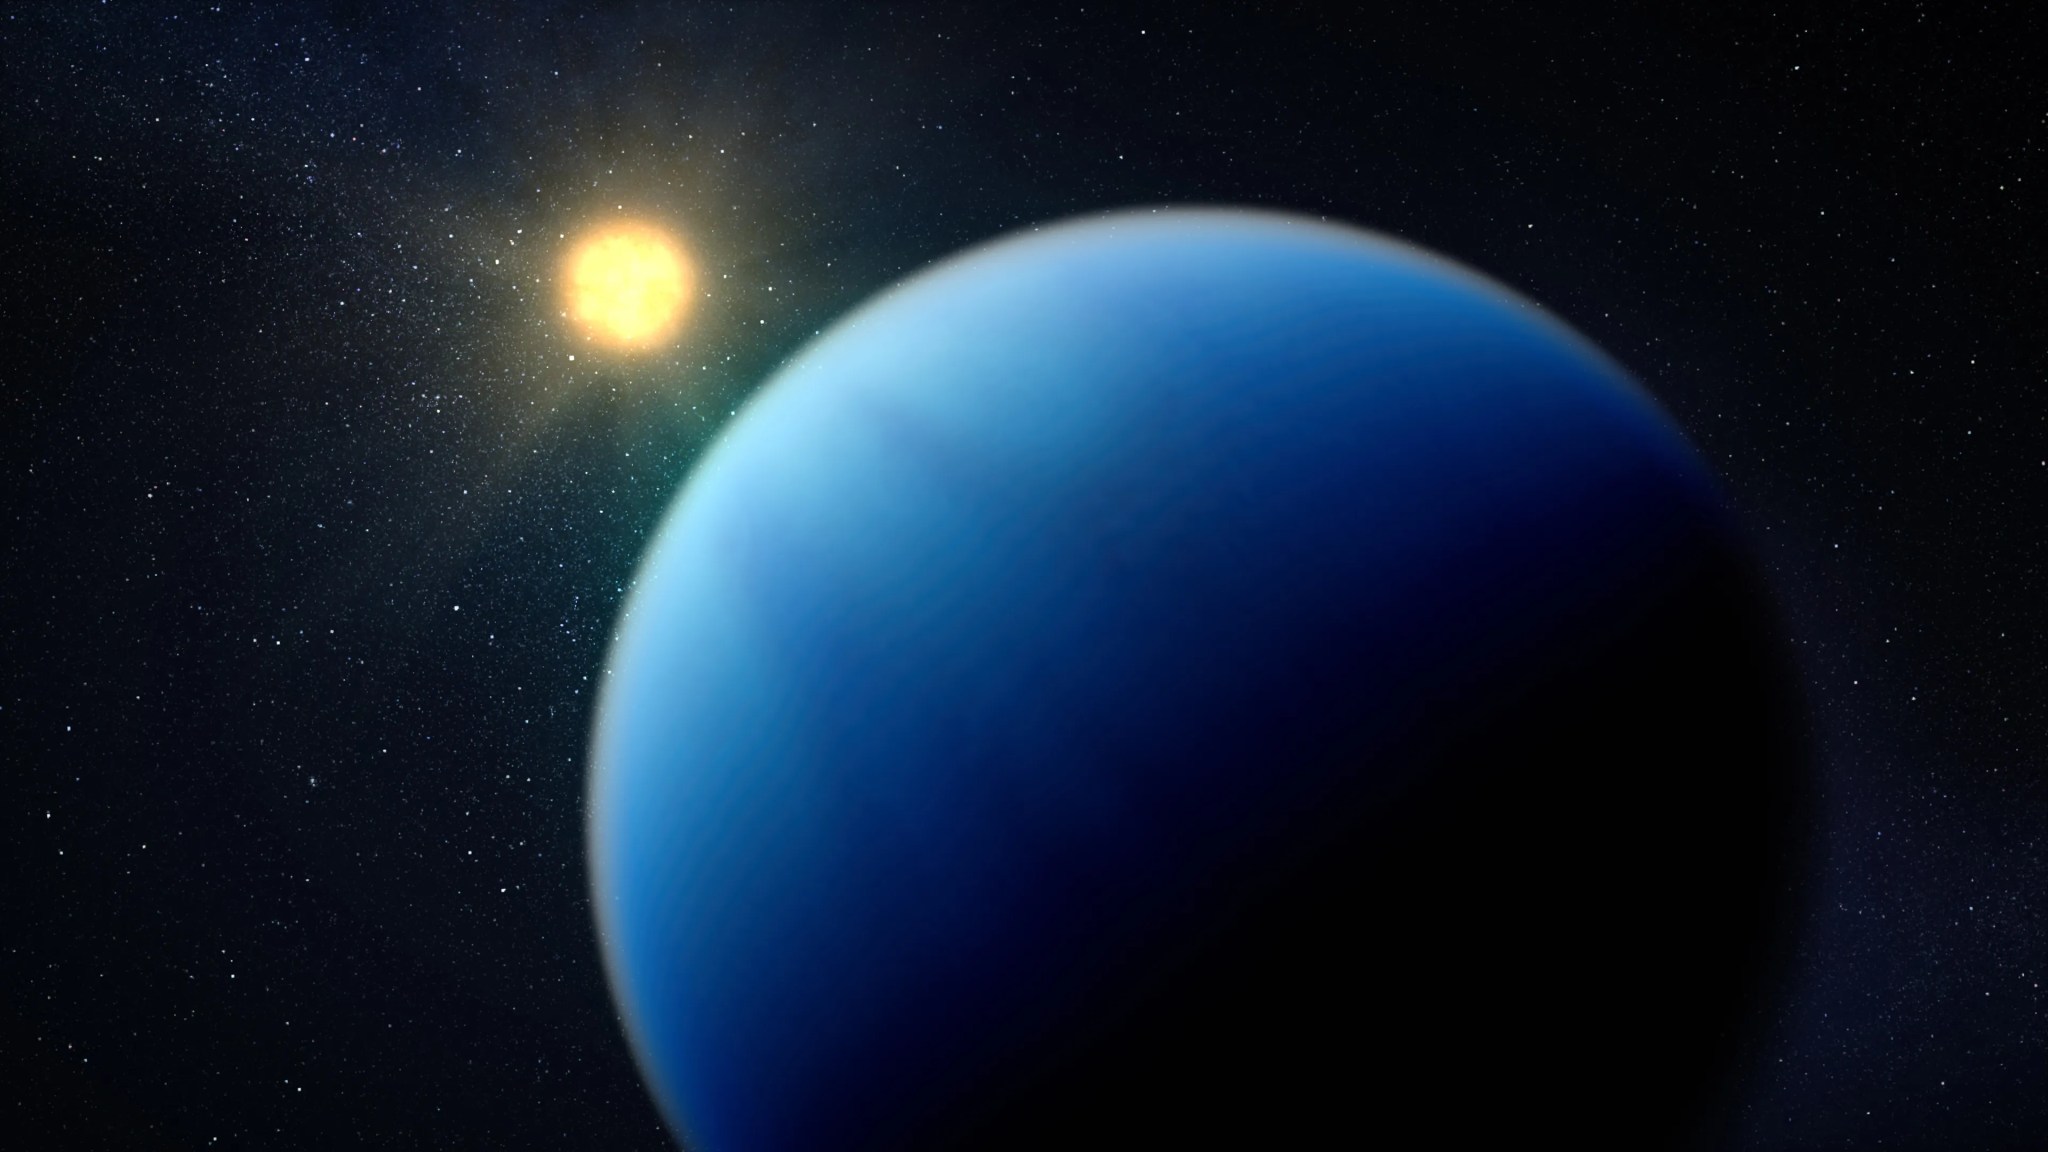 This artist’s concept shows what the sub-Neptune exoplanet TOI-421 b